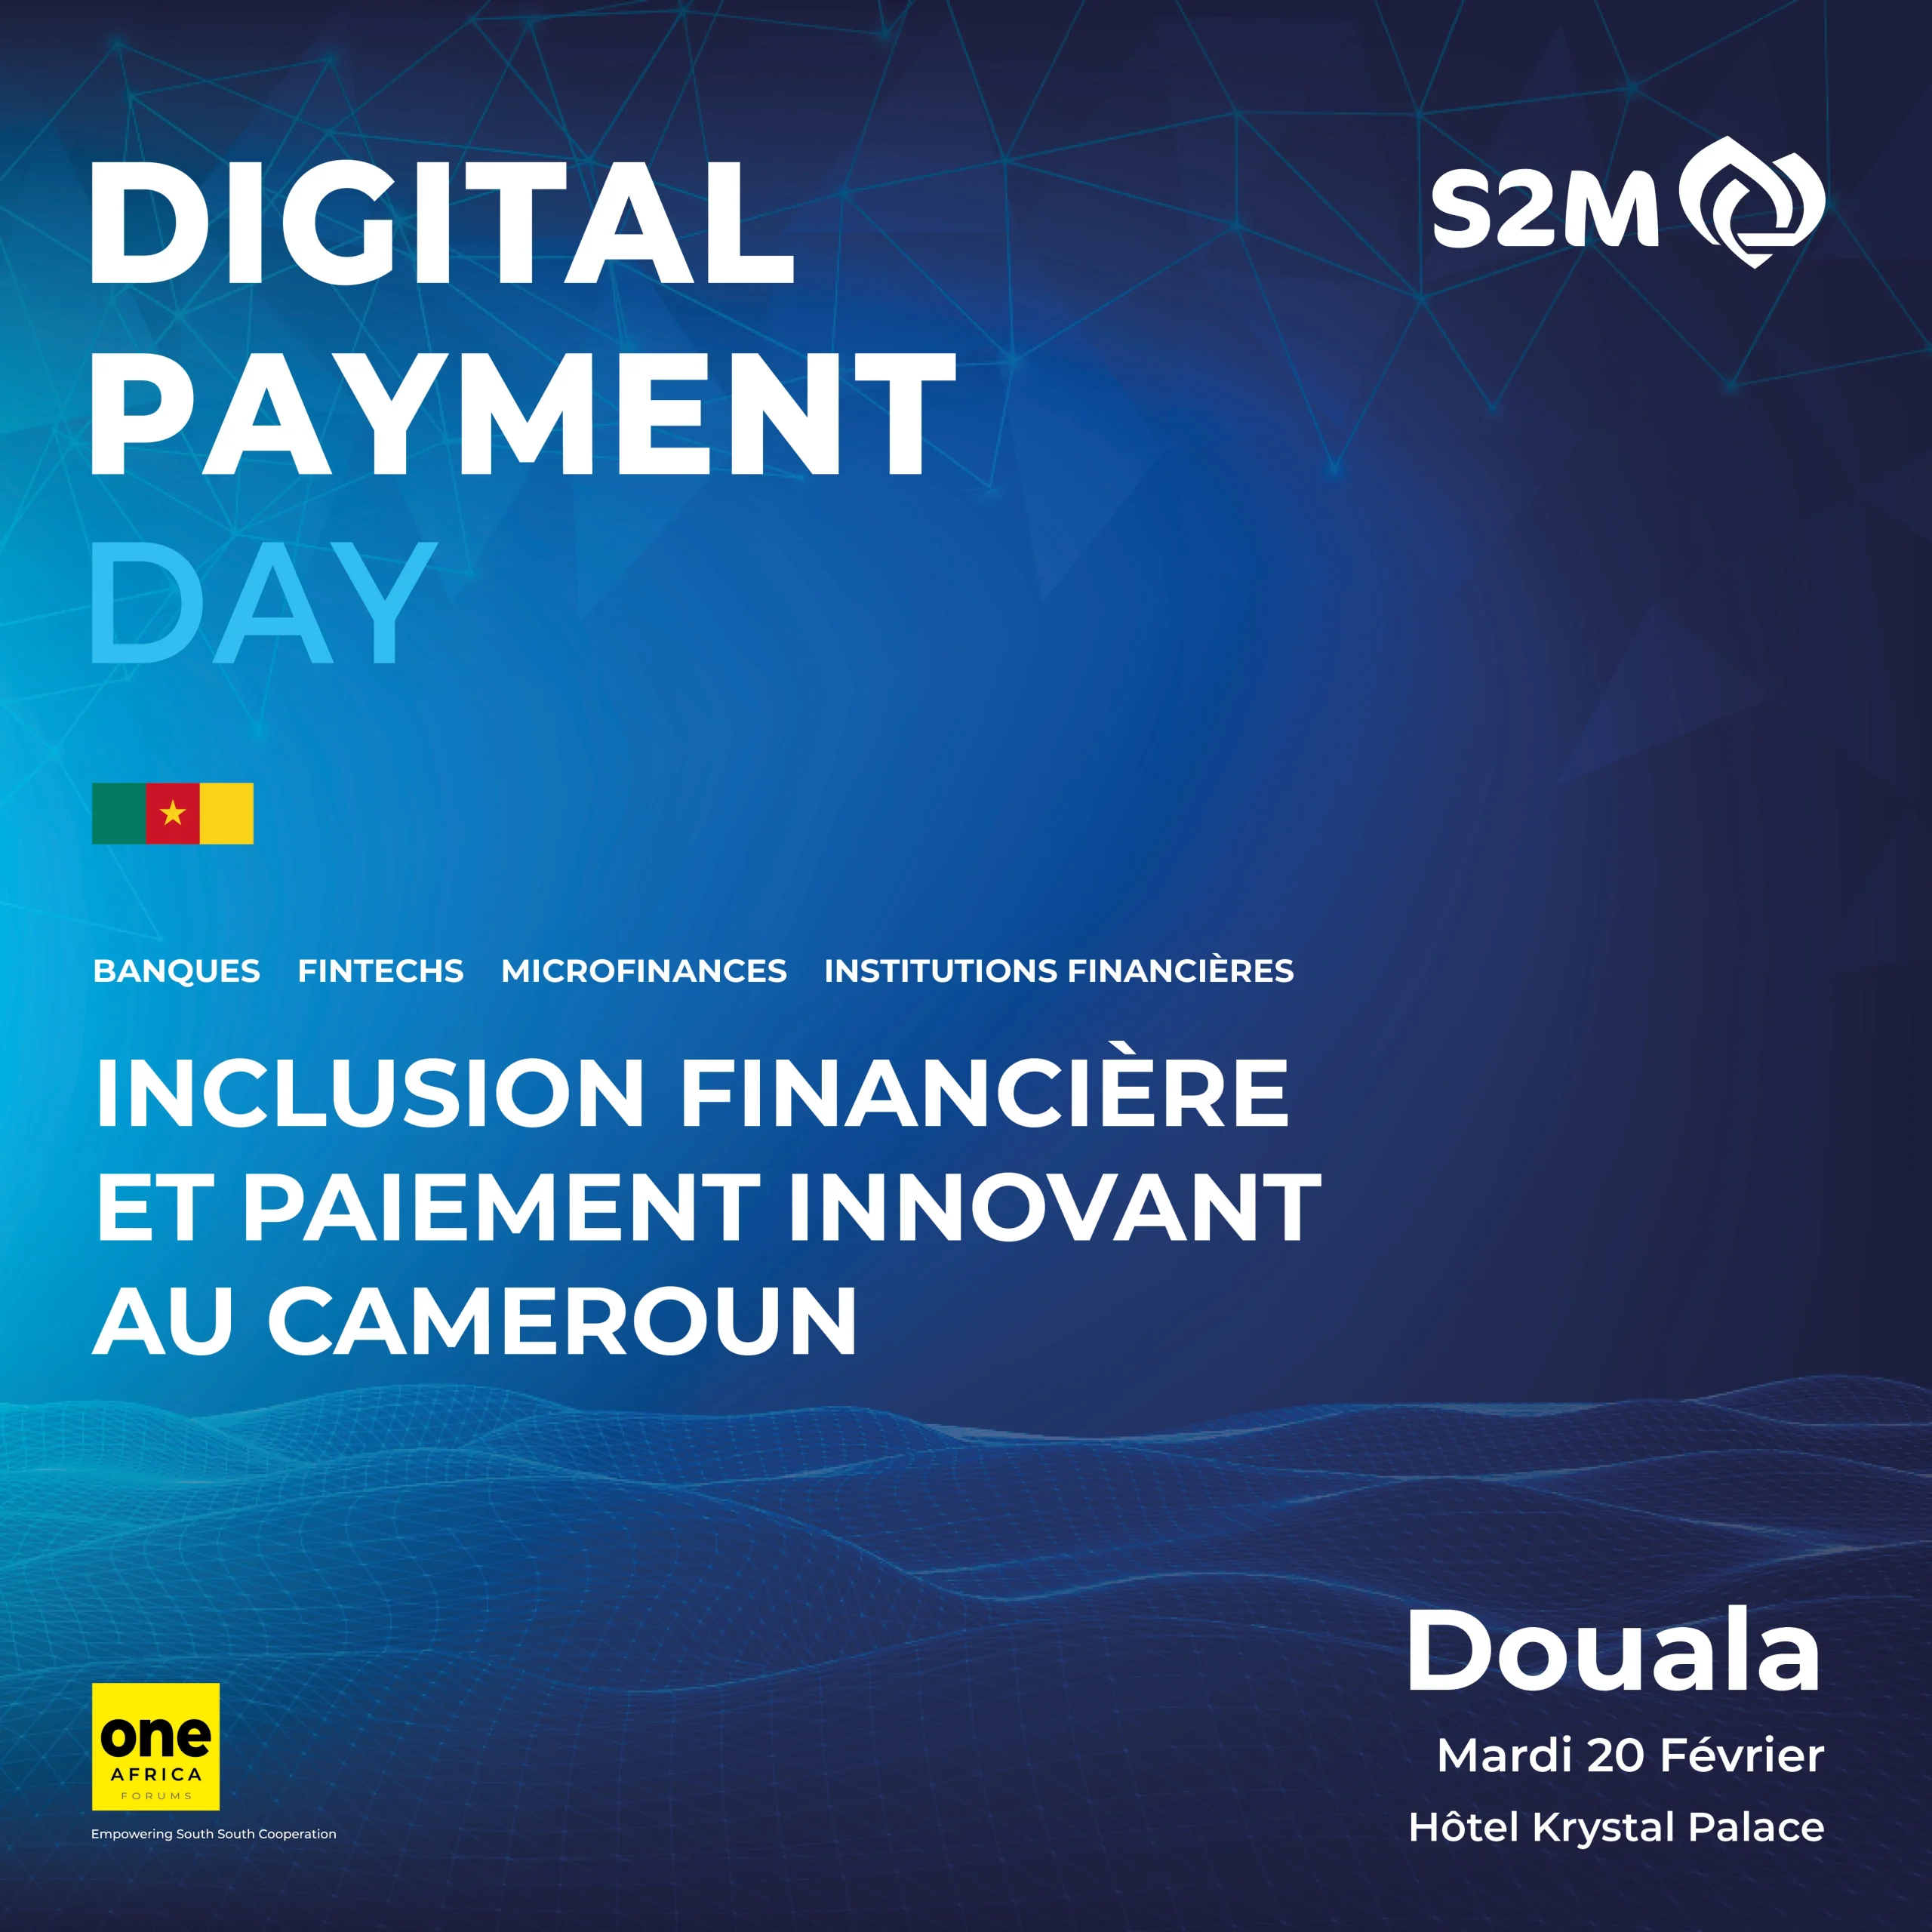 Digital Payment Day Douala by S2M